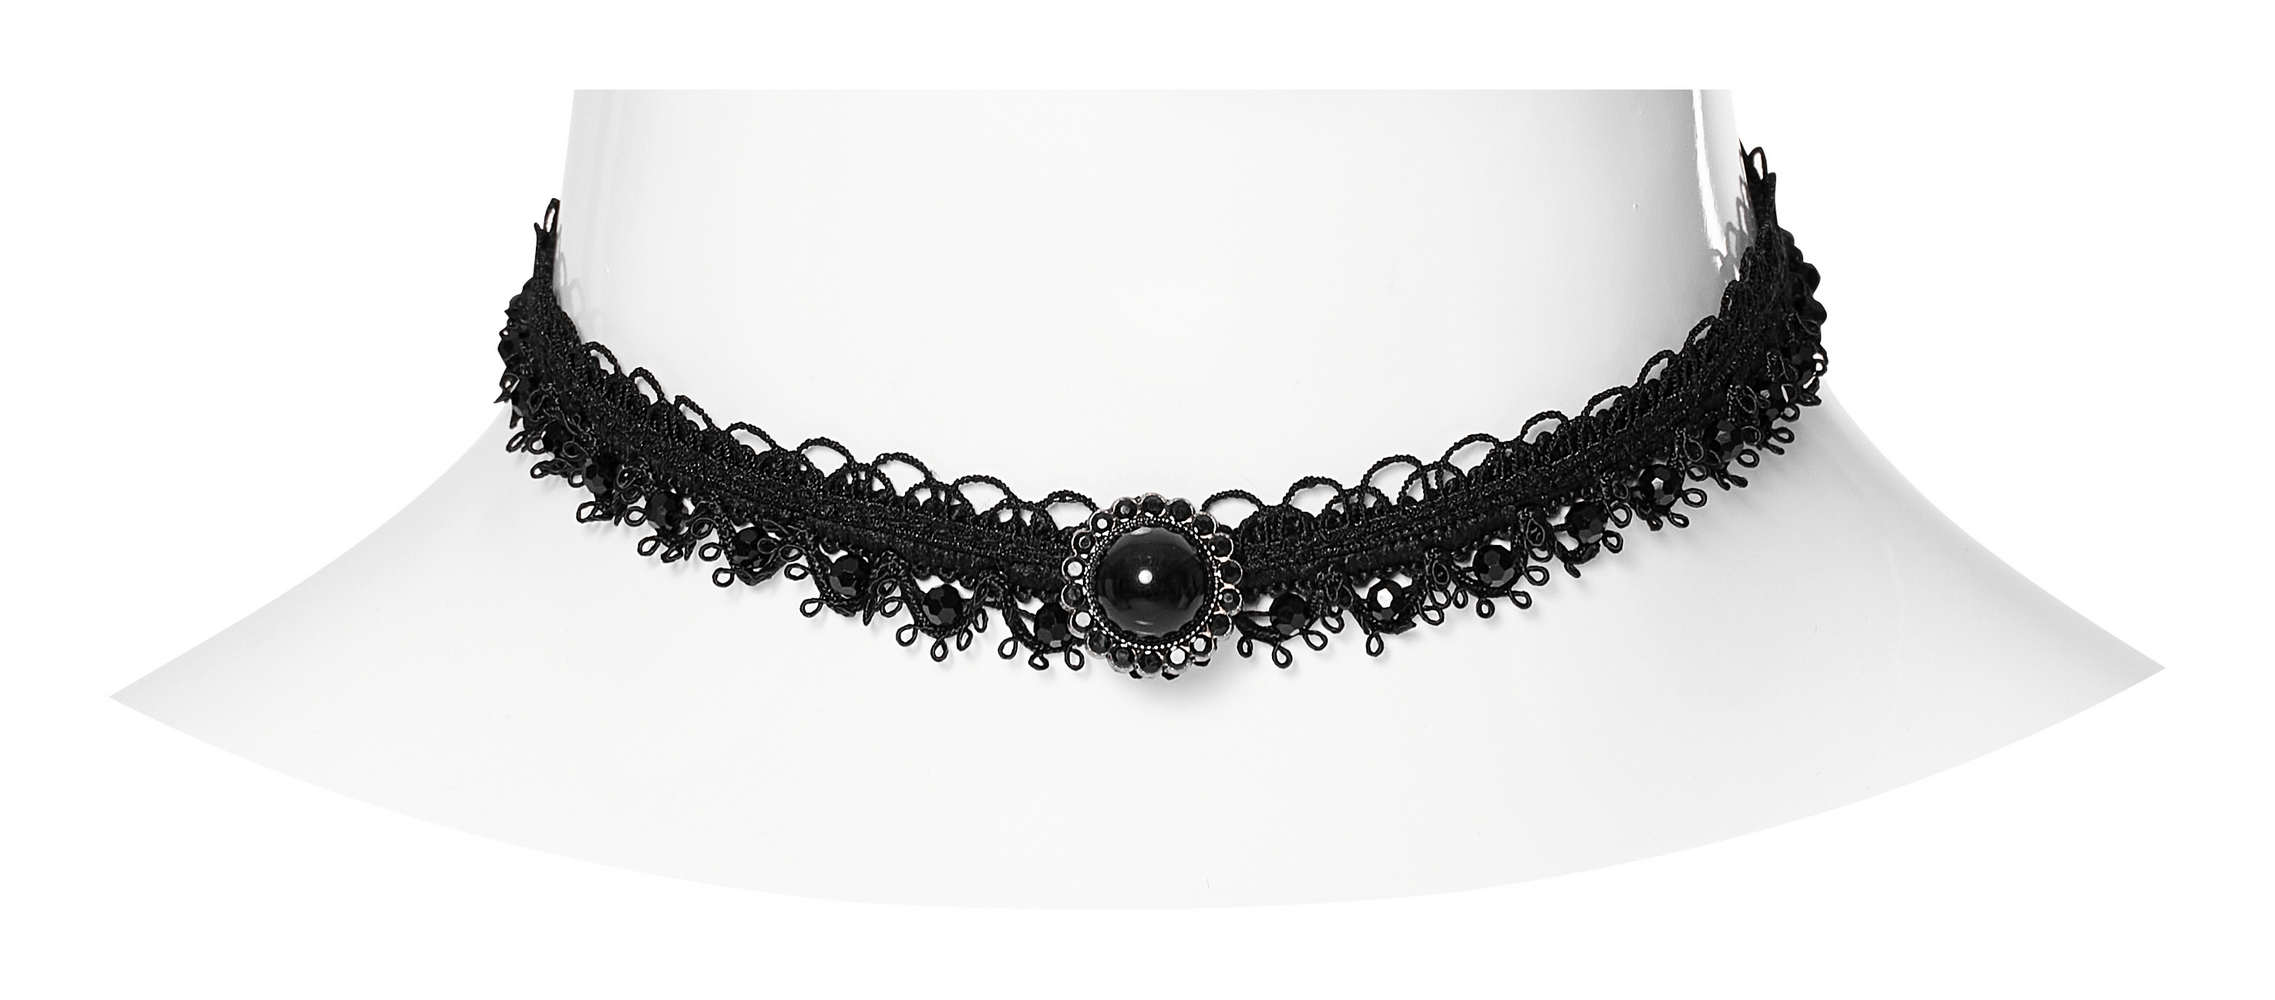 Victorian Lace Choker Necklace with Jet Black Gem - HARD'N'HEAVY